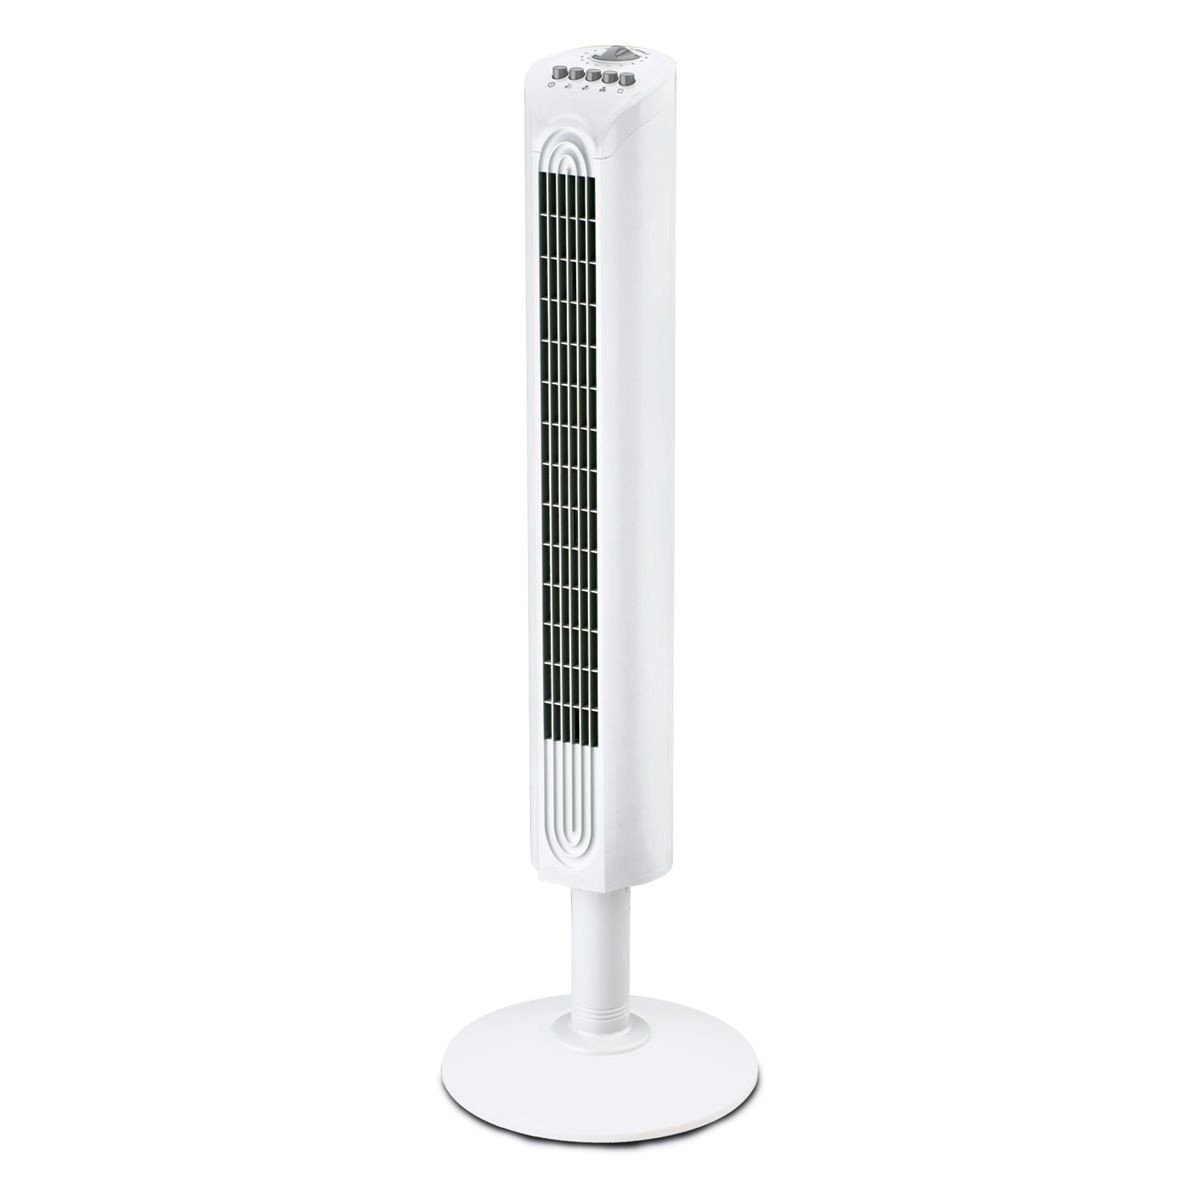 Small Heaters for Bedroom New Fairly Good Lasko Ionizer tower Fan From White Plastic